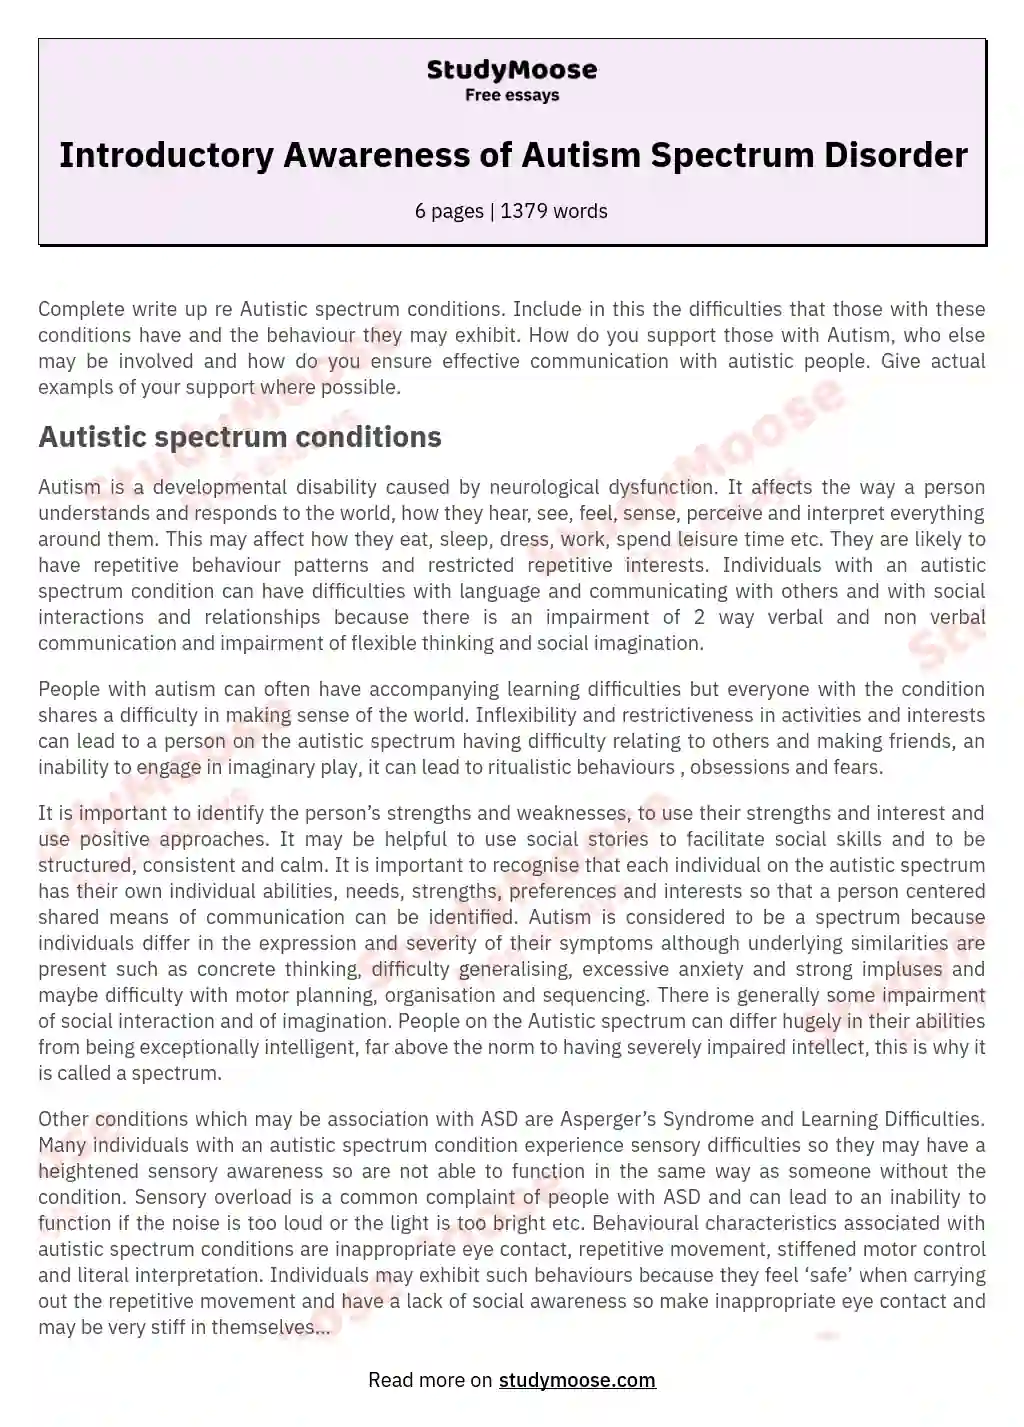 Introductory Awareness of Autism Spectrum Disorder essay